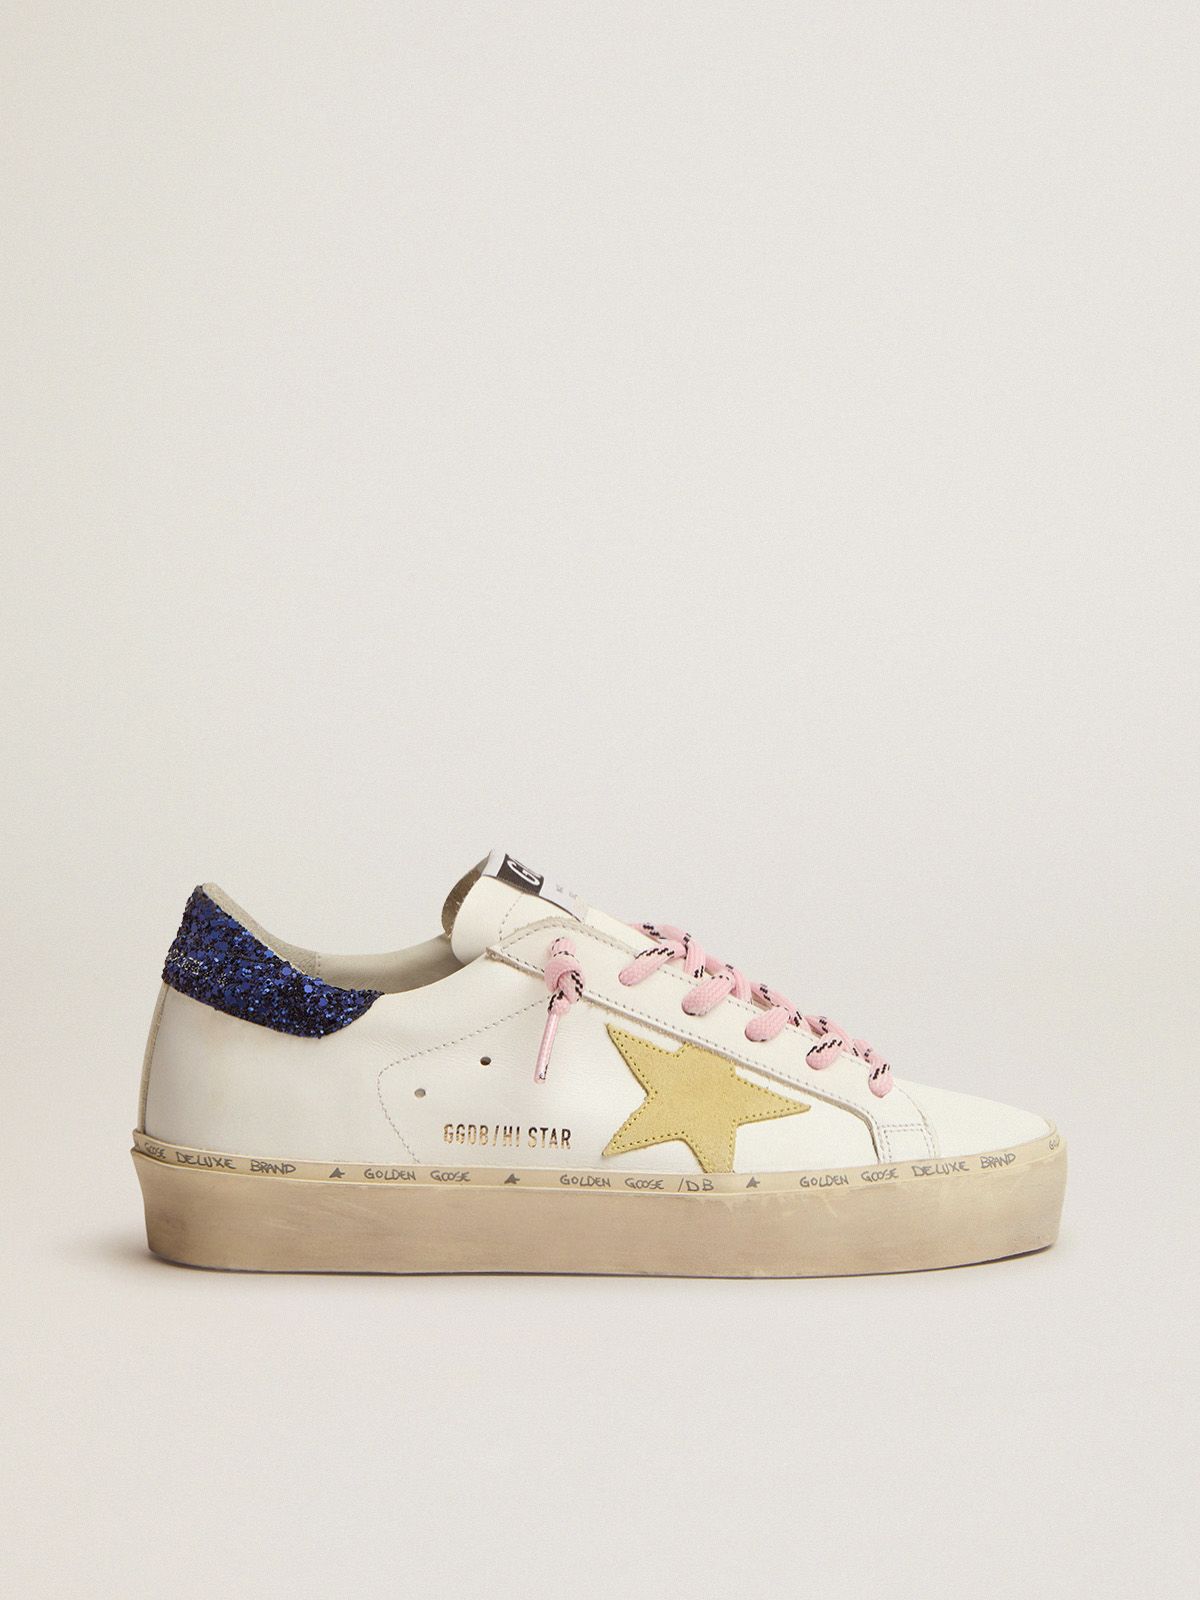 Sneakers Golden Goose Uomo Hi Star LTD sneakers with blue glitter heel tab and yellow suede star